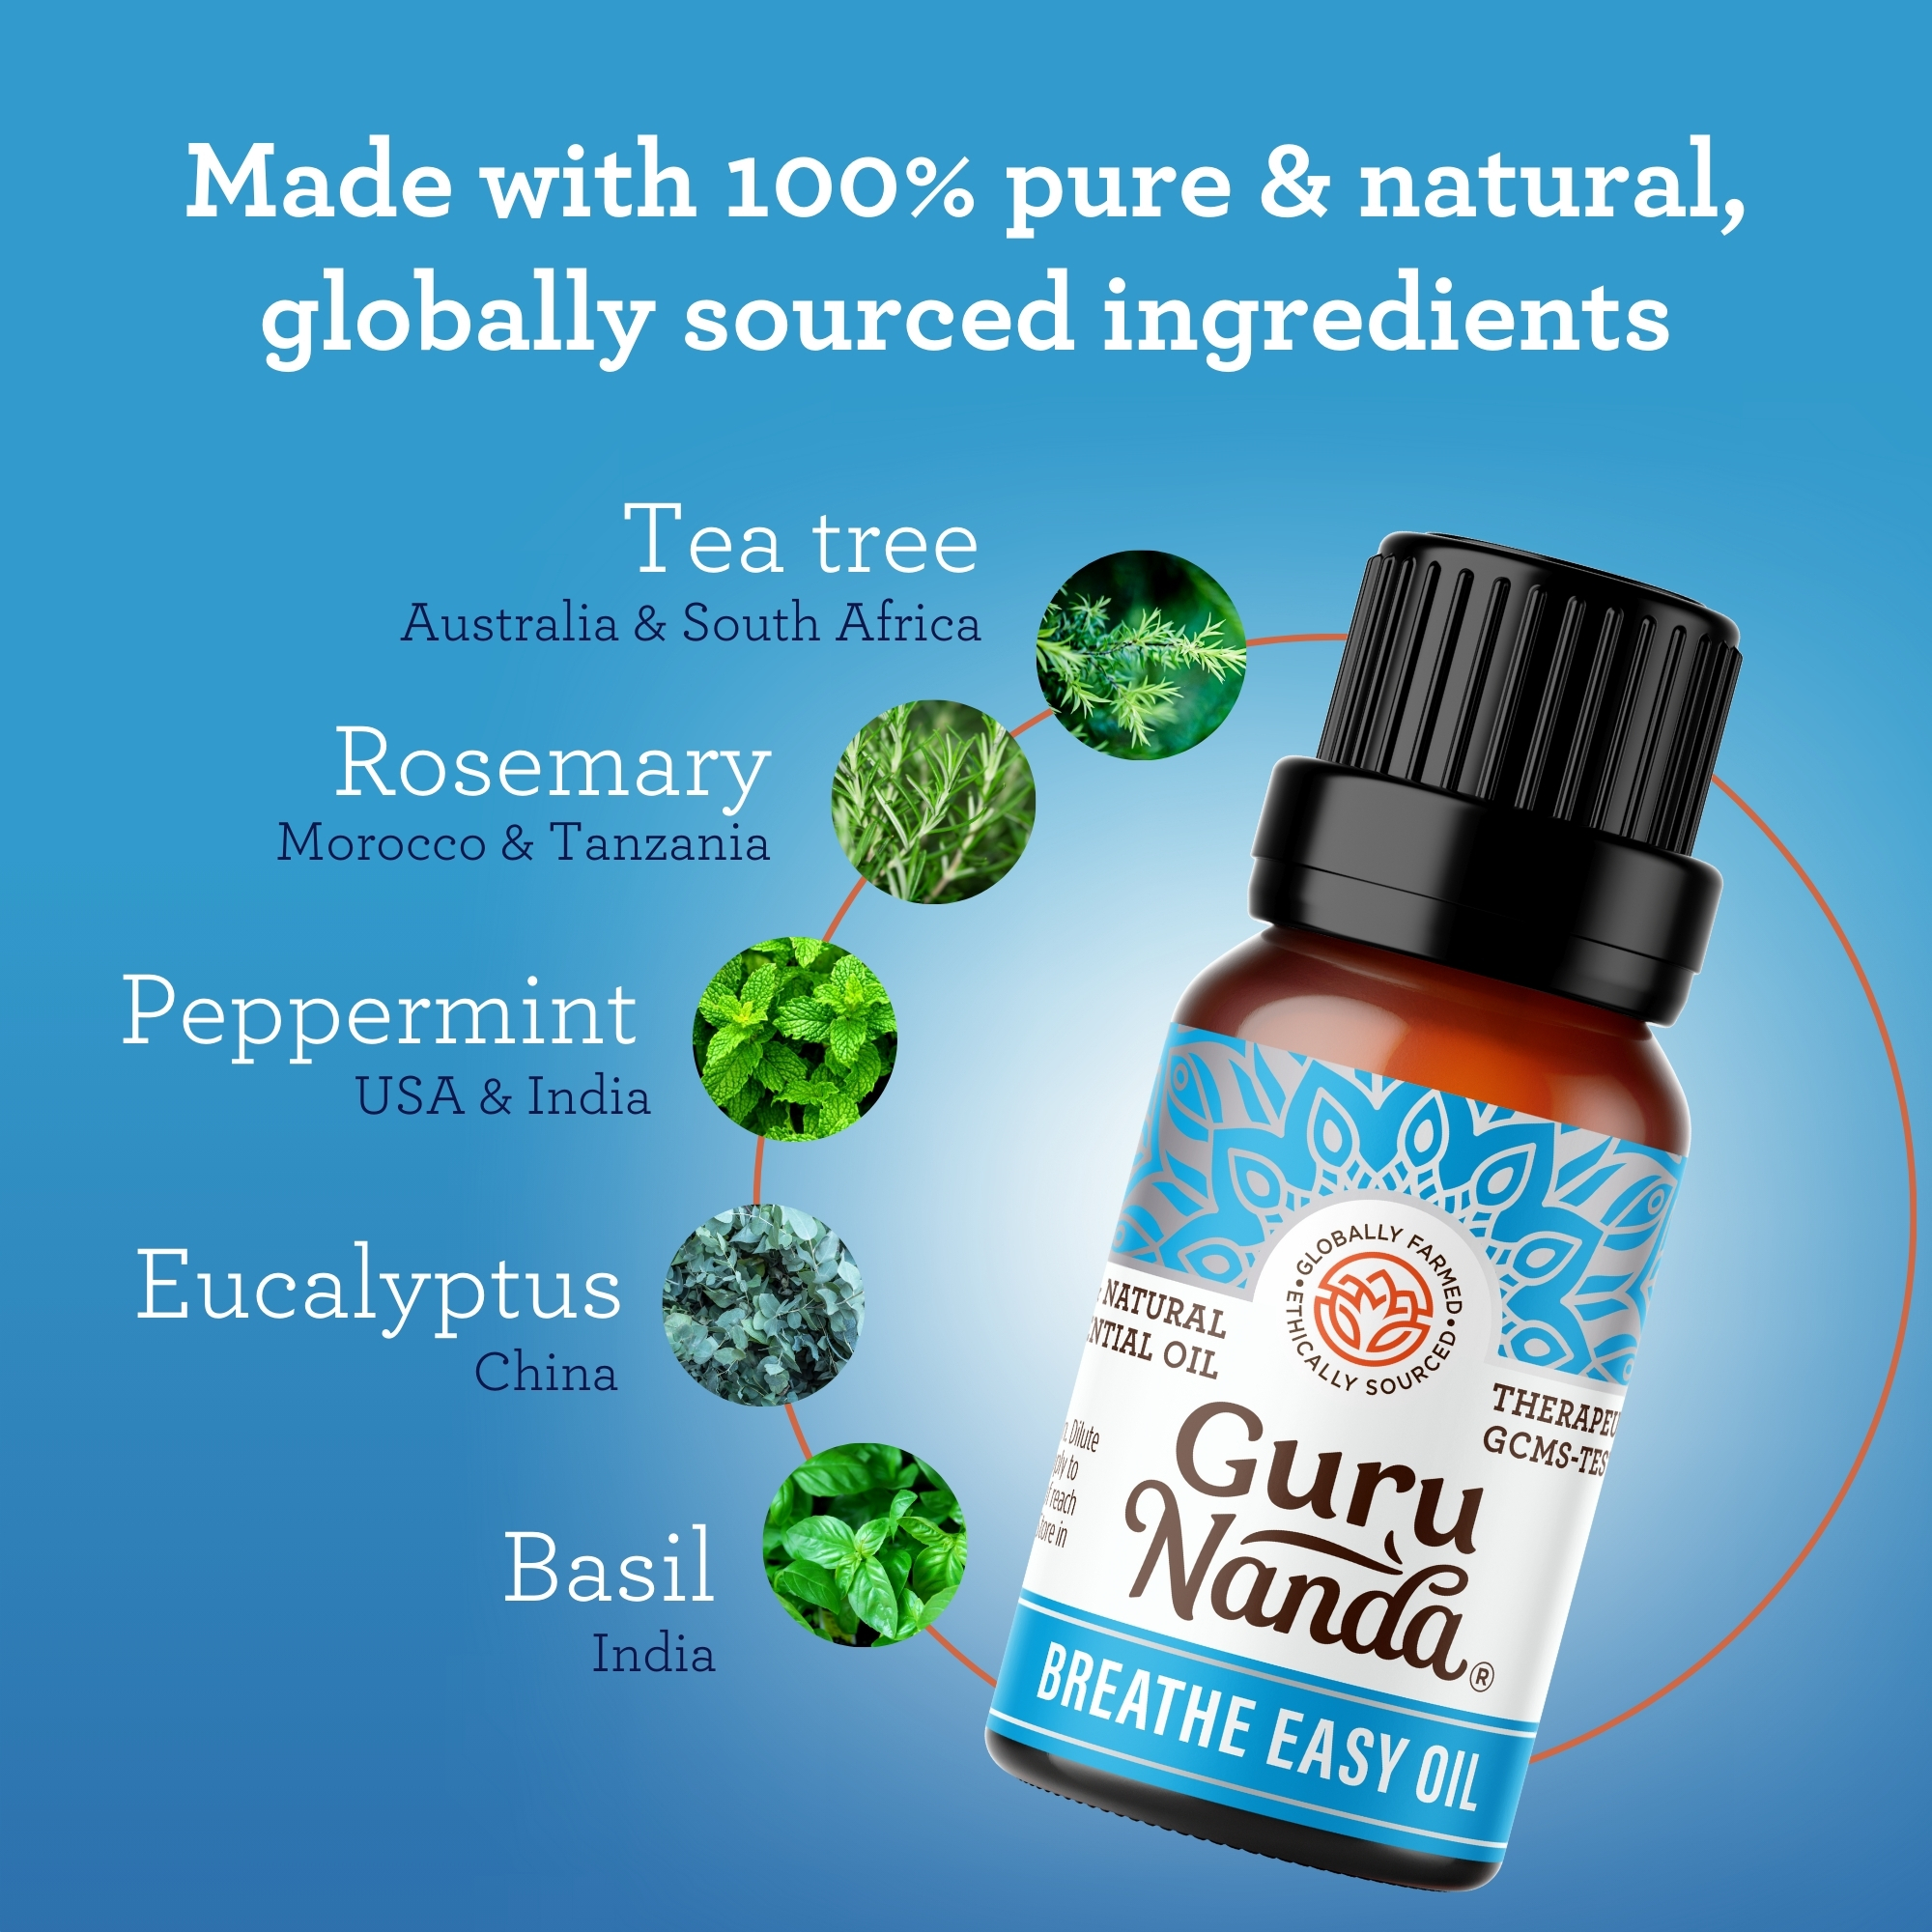 GuruNanda Breathe Easy Essential Oil Blend for Aromatherapy & Diffuser - 15mL - image 4 of 9